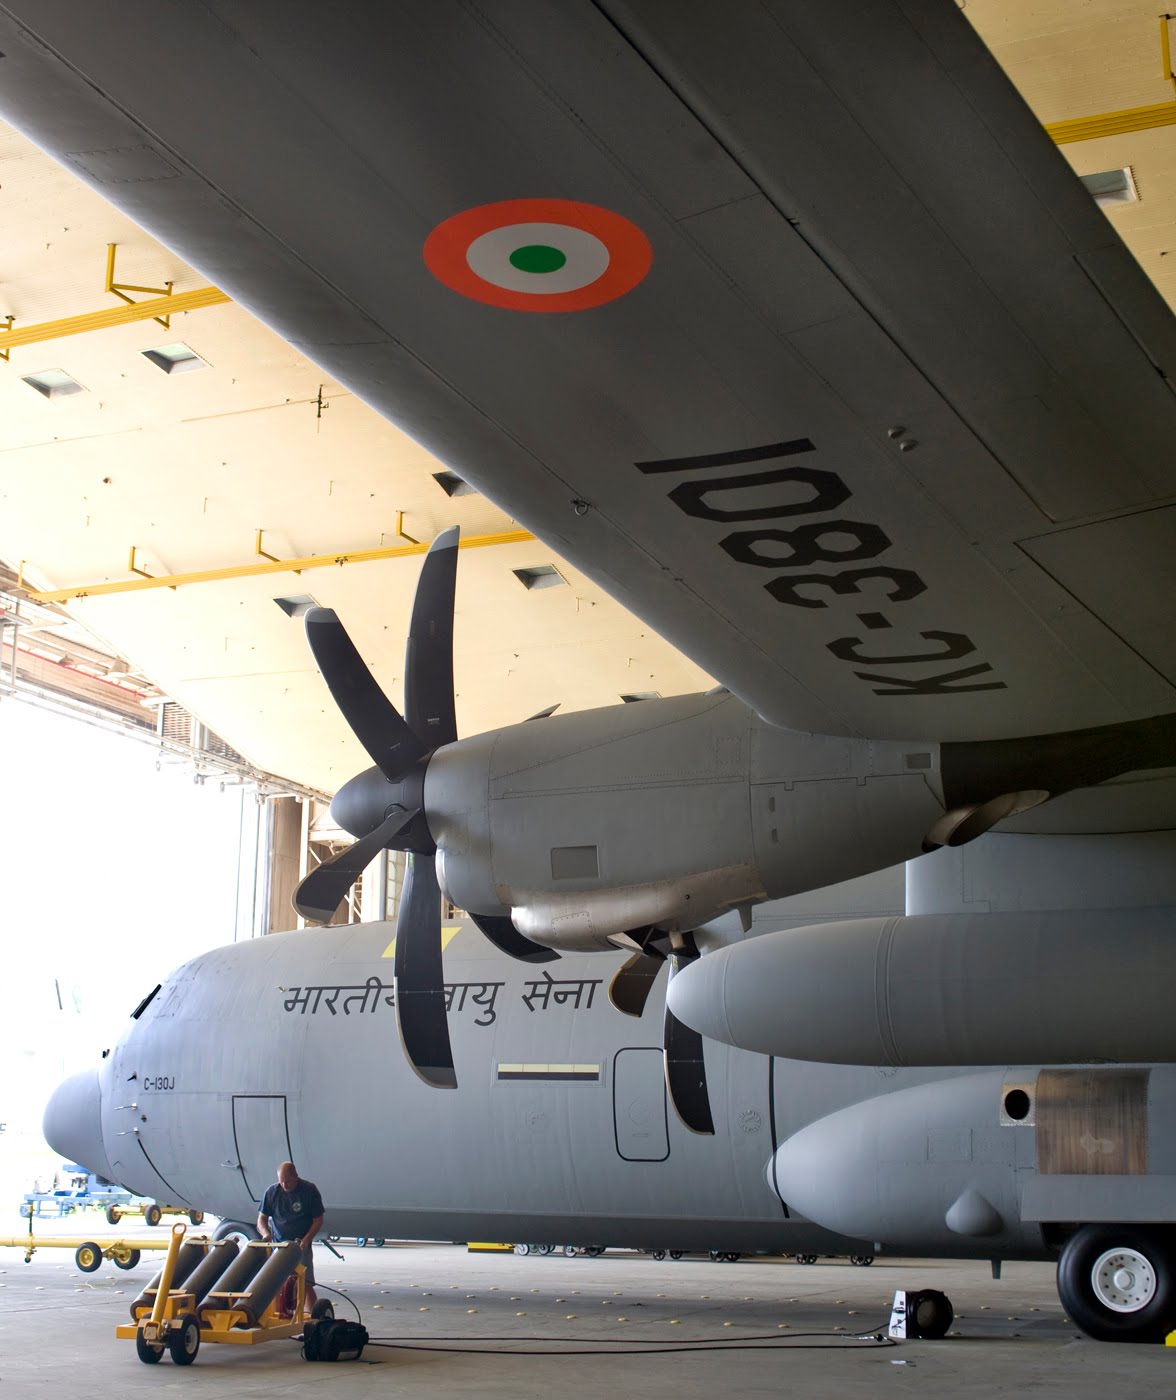 India’s first KC-3801 Super Hercules plane takes to the skies, Hercules Plane of India